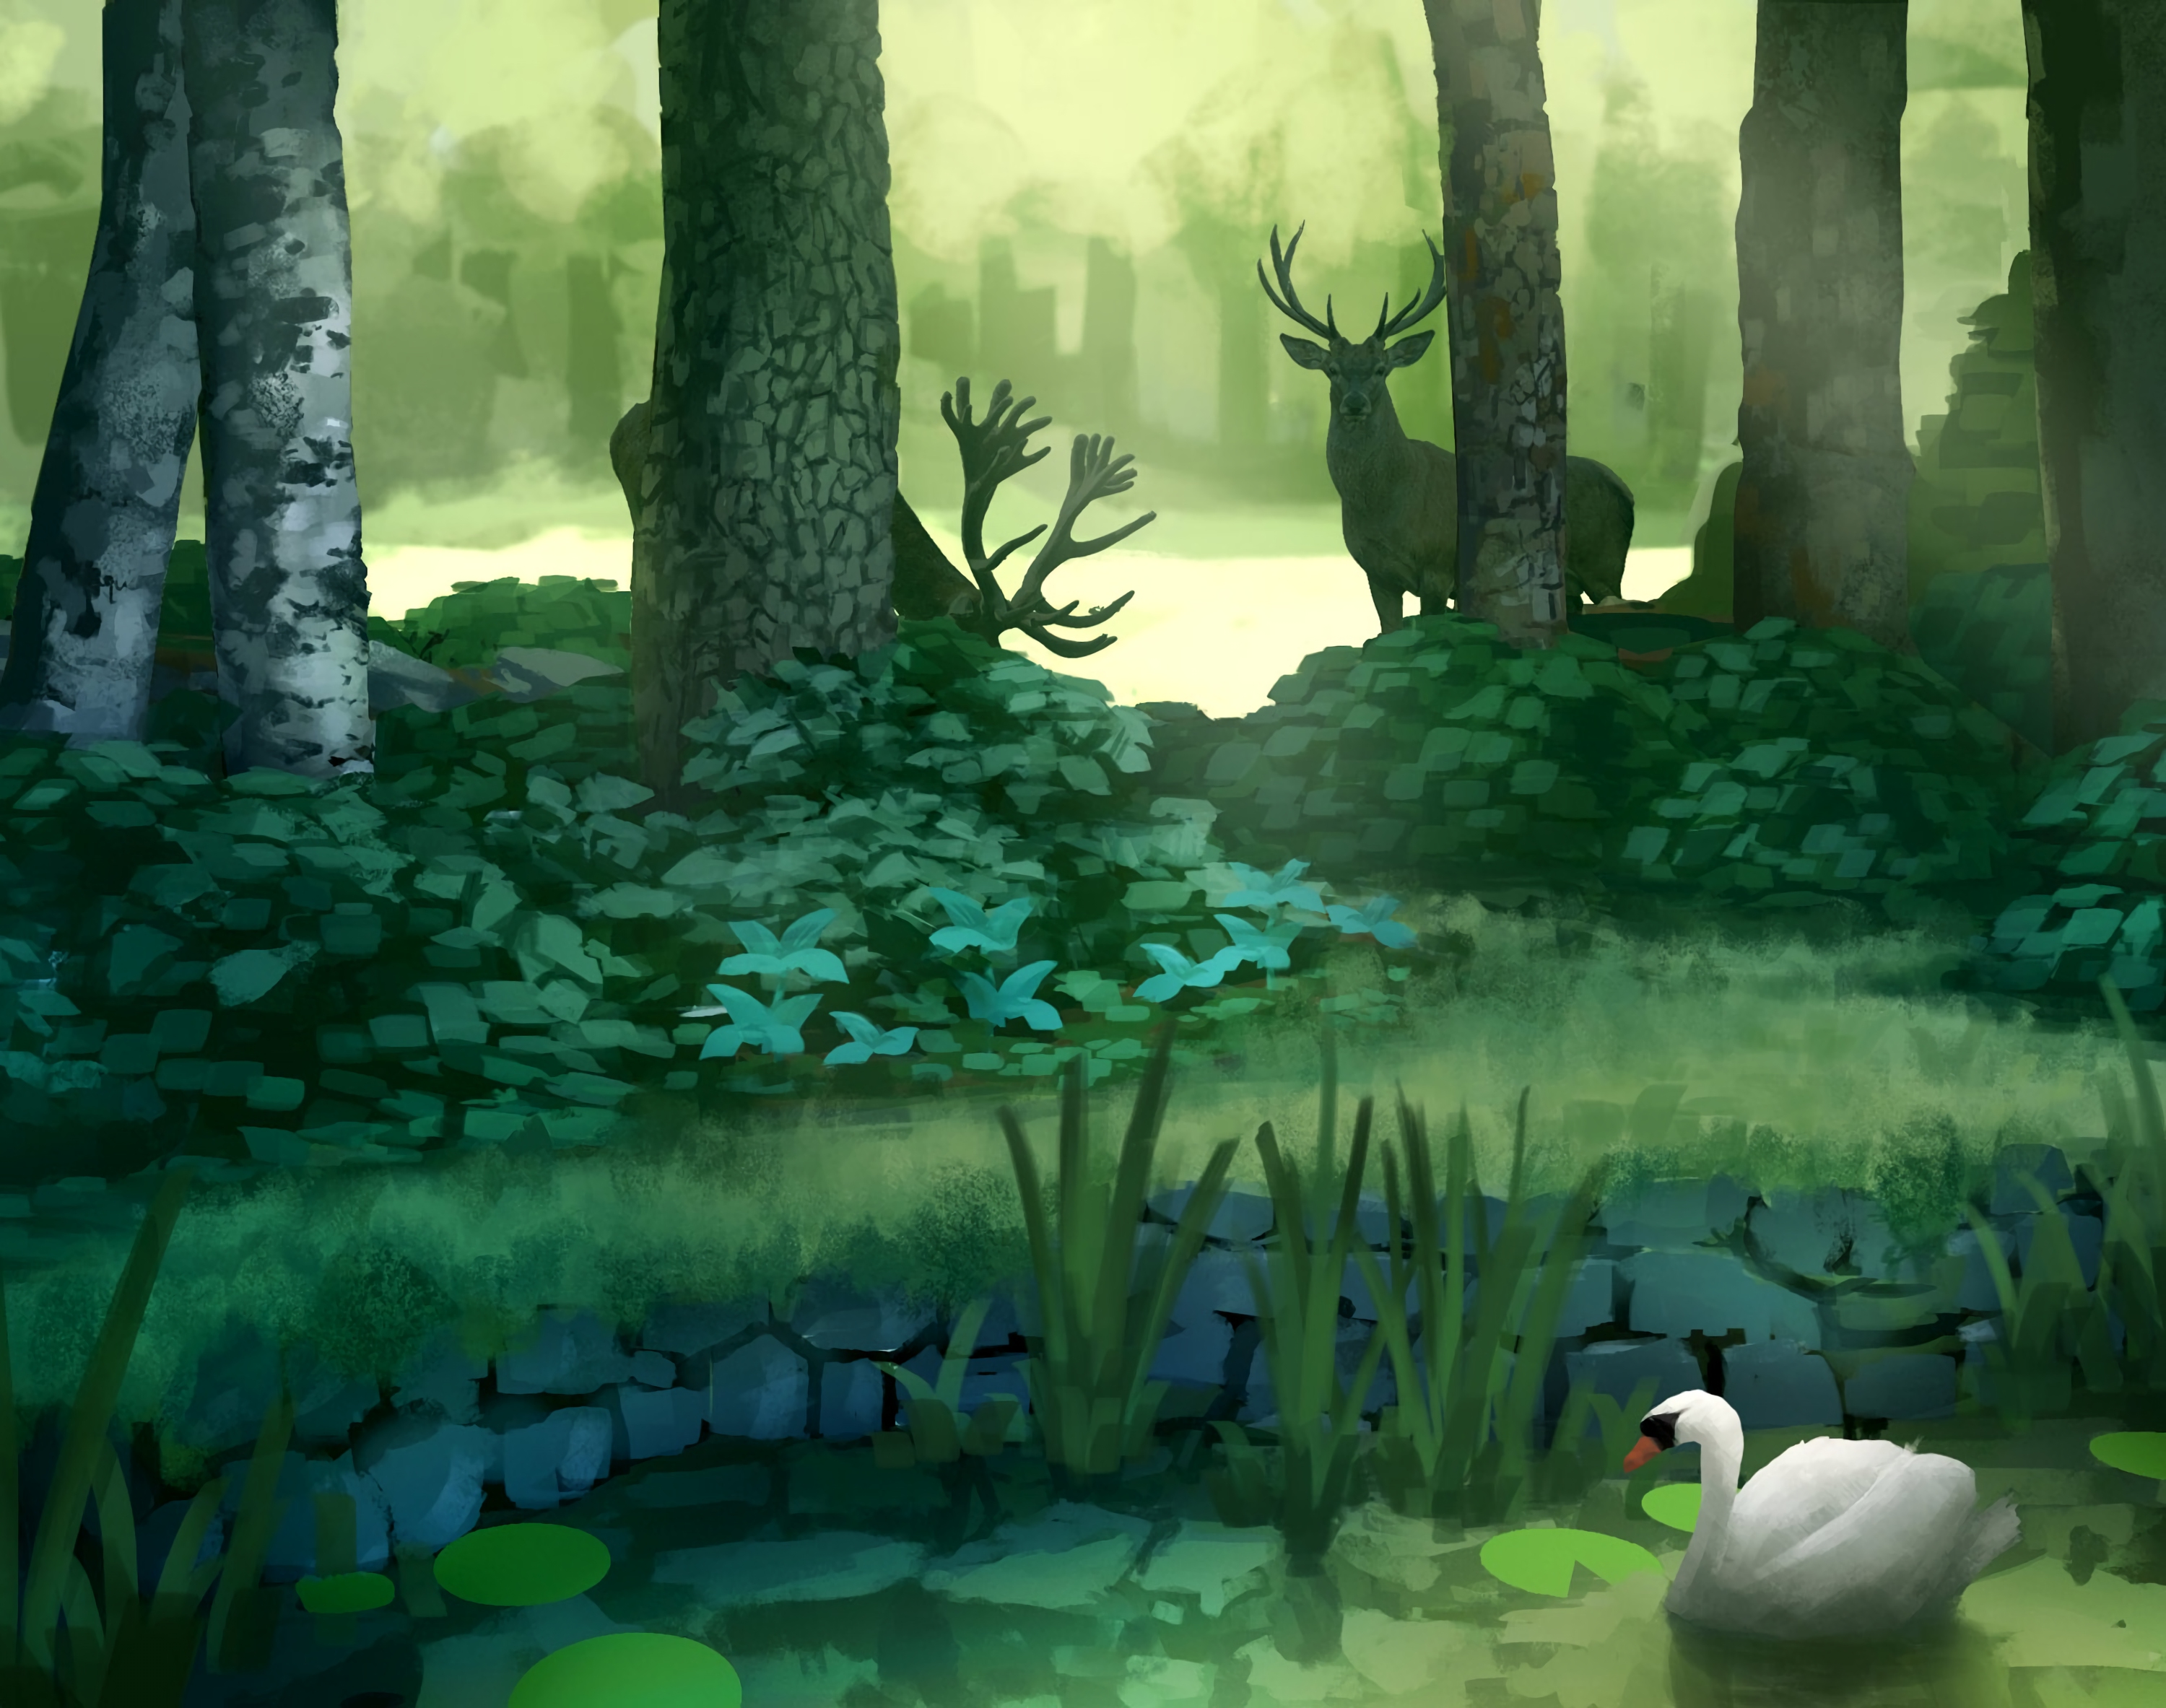 deers, trees, art, forest, swan, pond for Windows